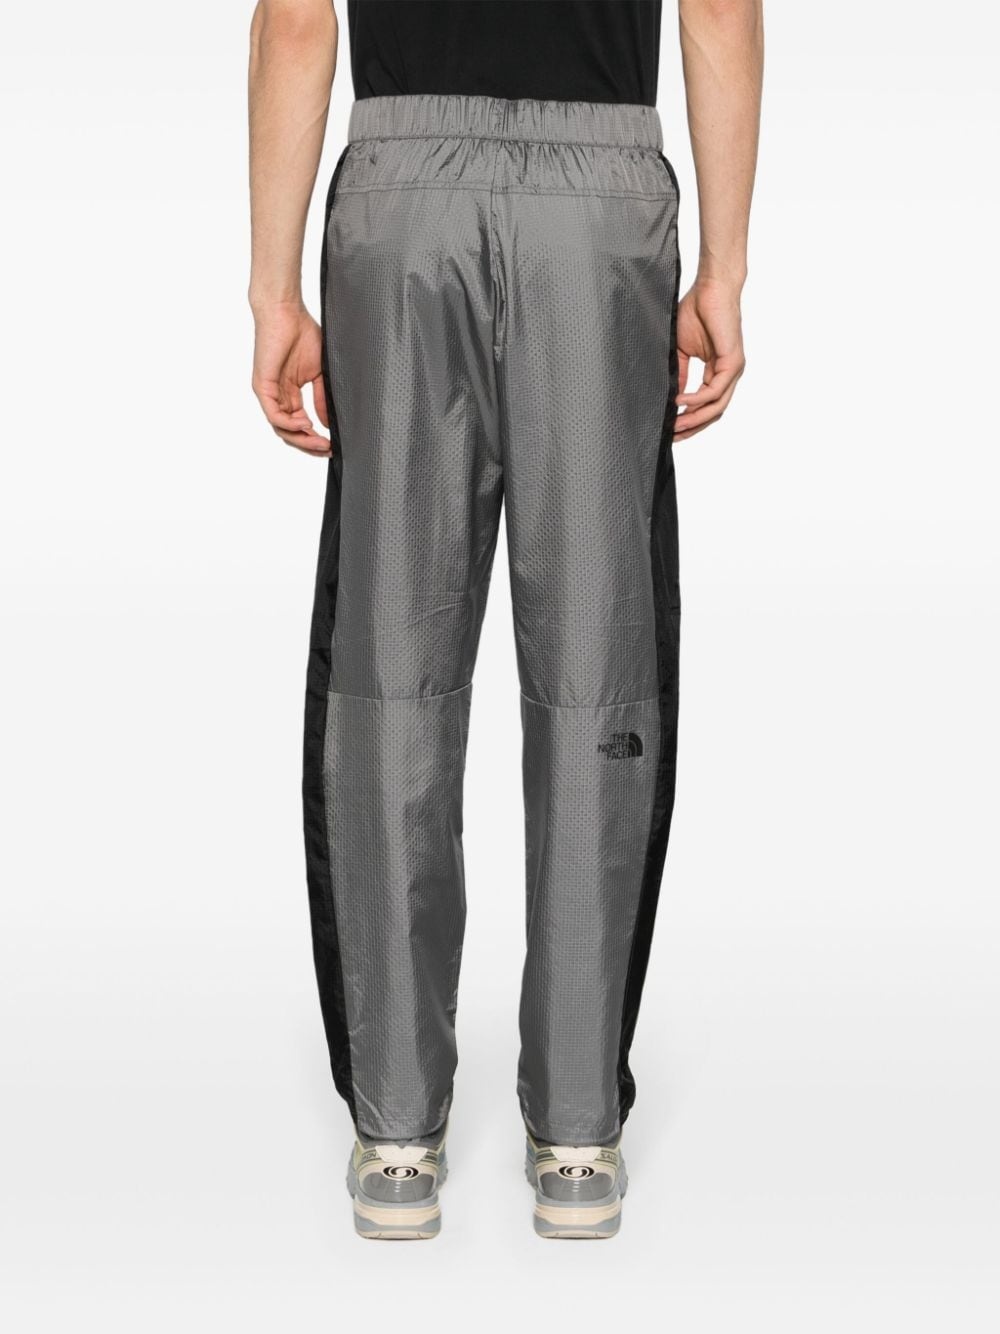 Wind Shell ripstop track pants - 5